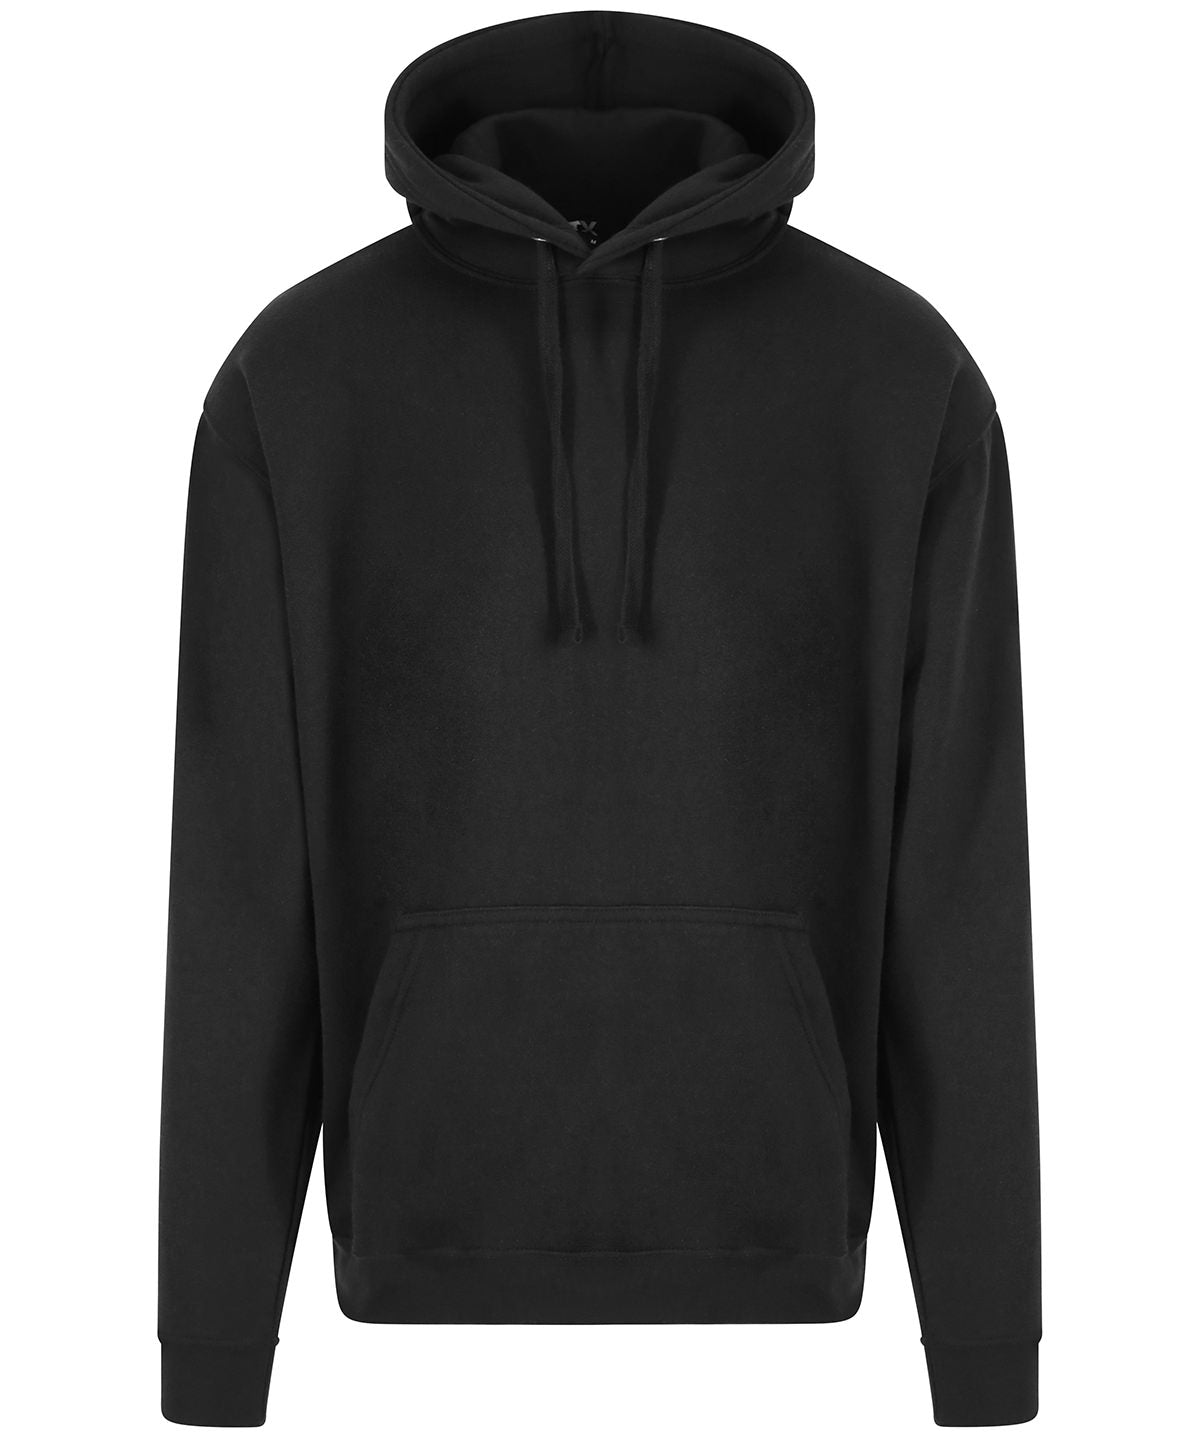 Classic VW Cup Unisex Hoodie